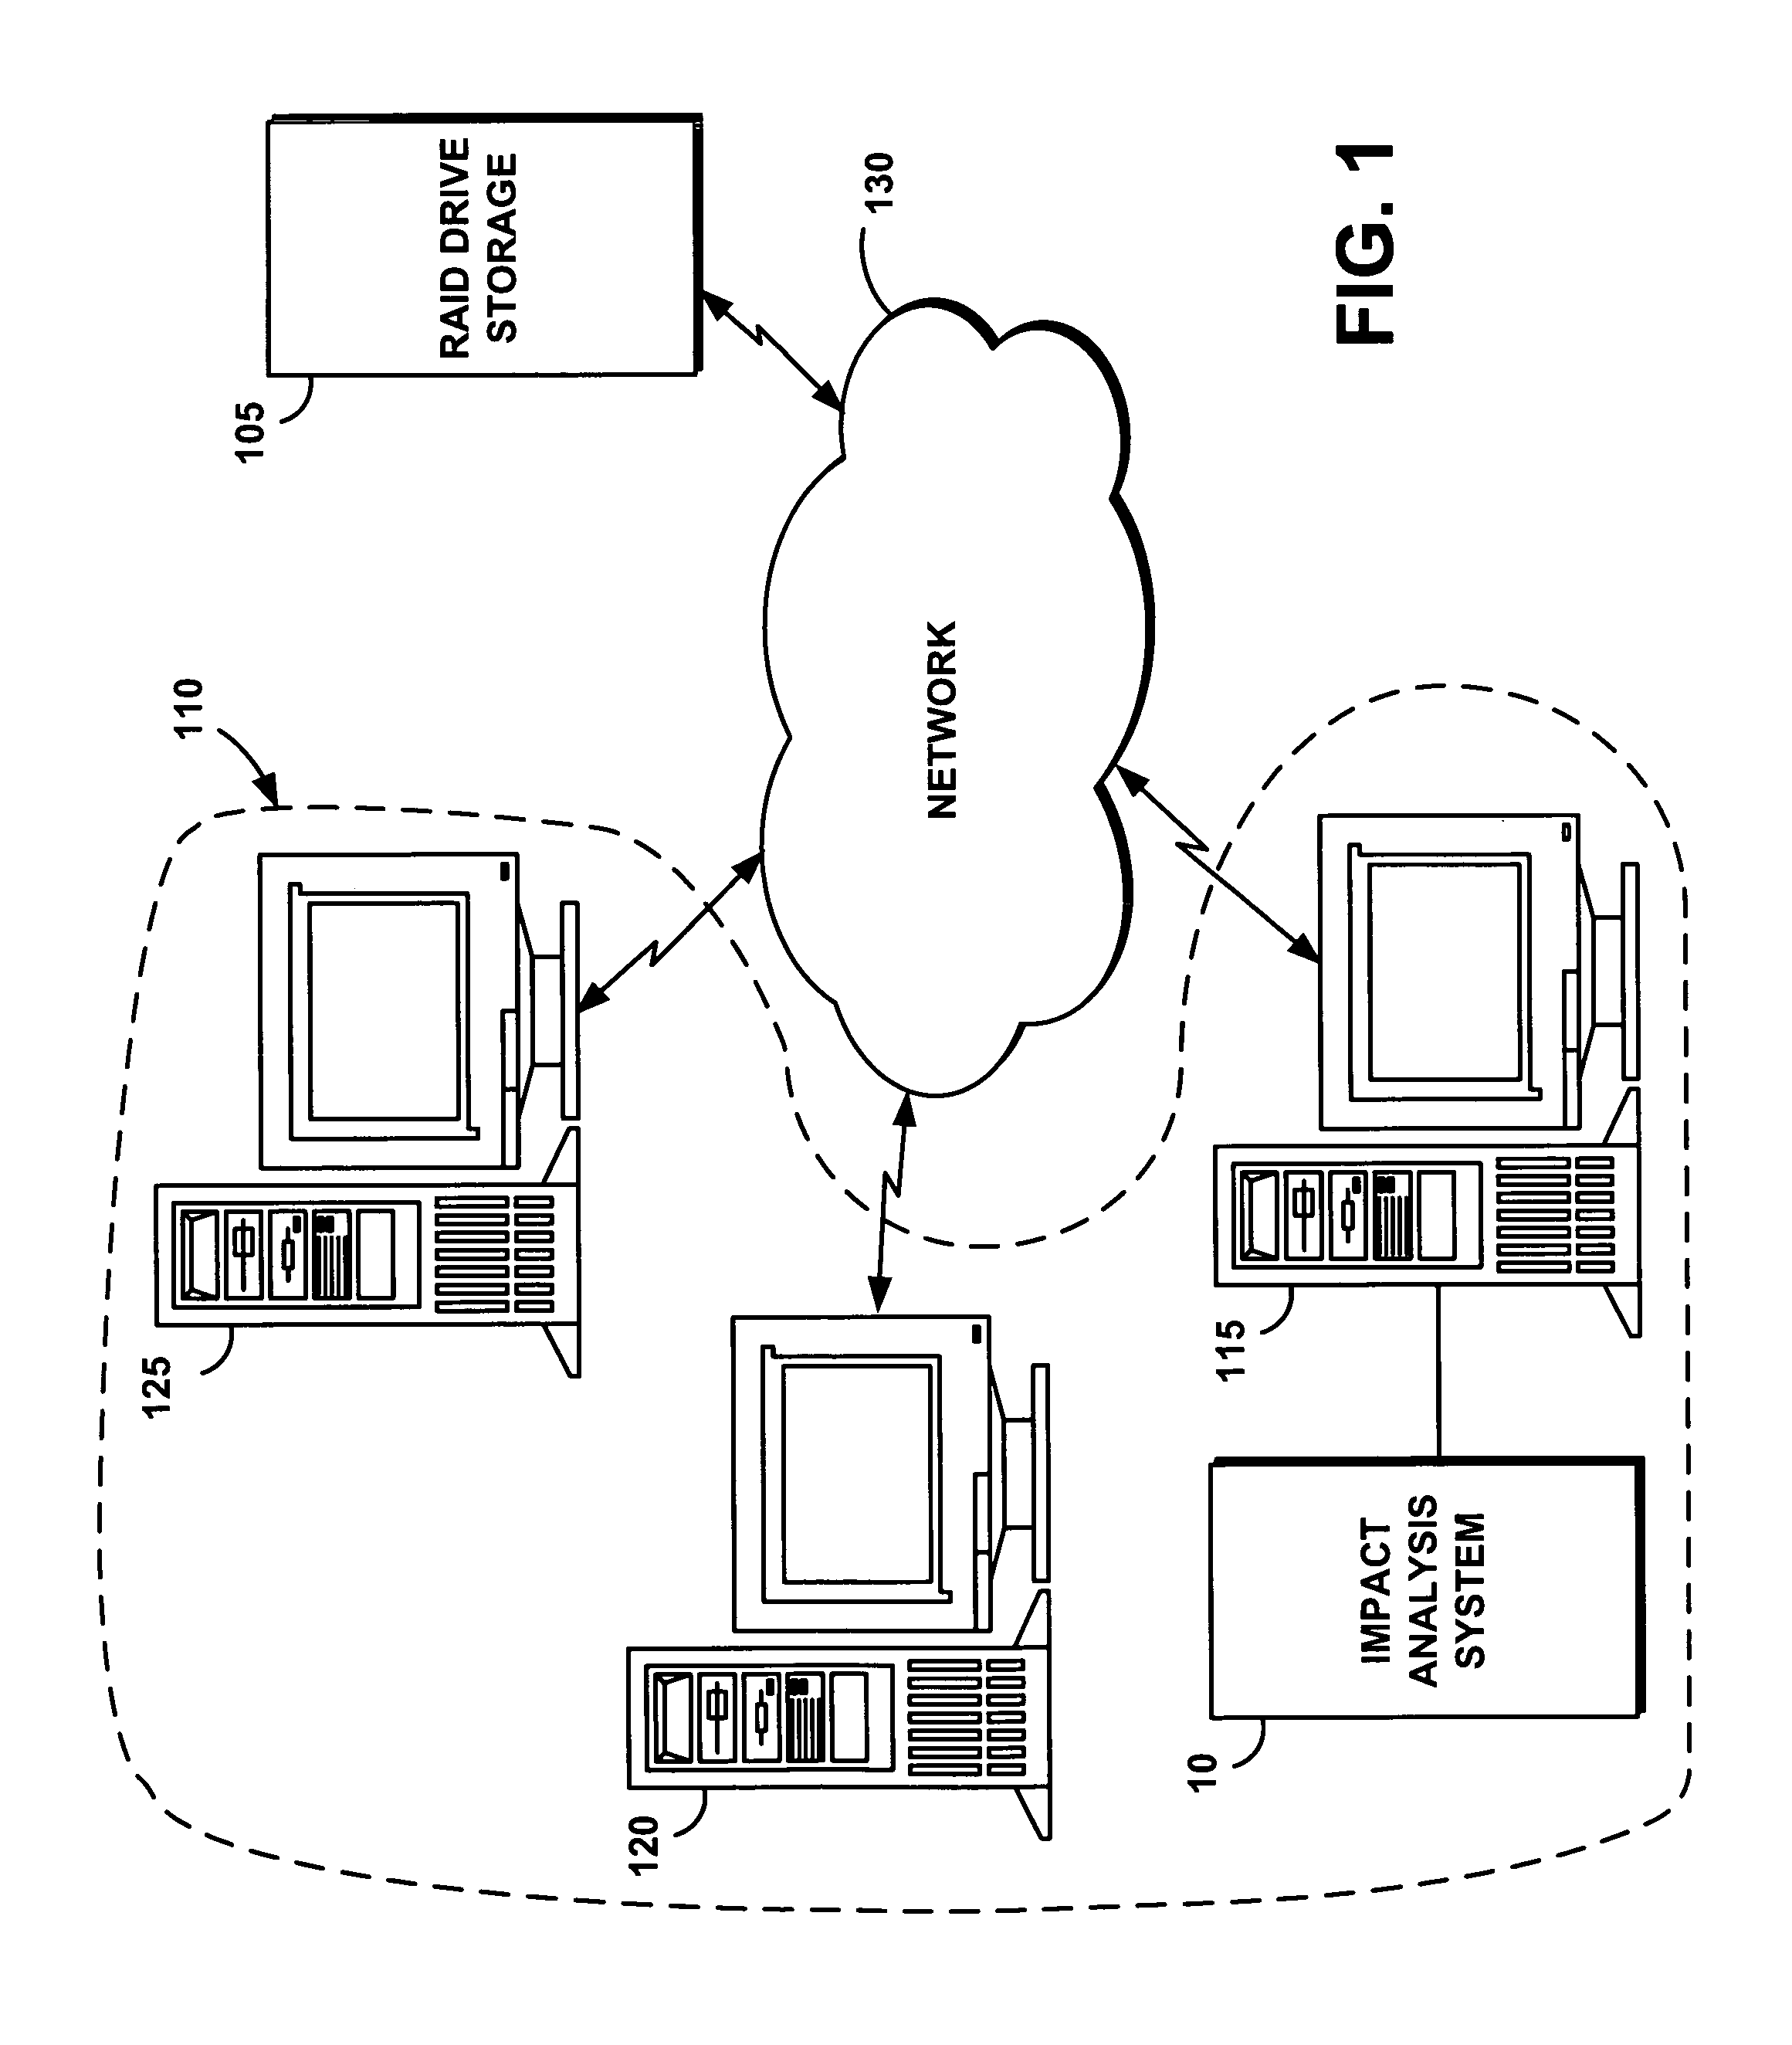 Method for proactive impact analysis of policy-based storage systems